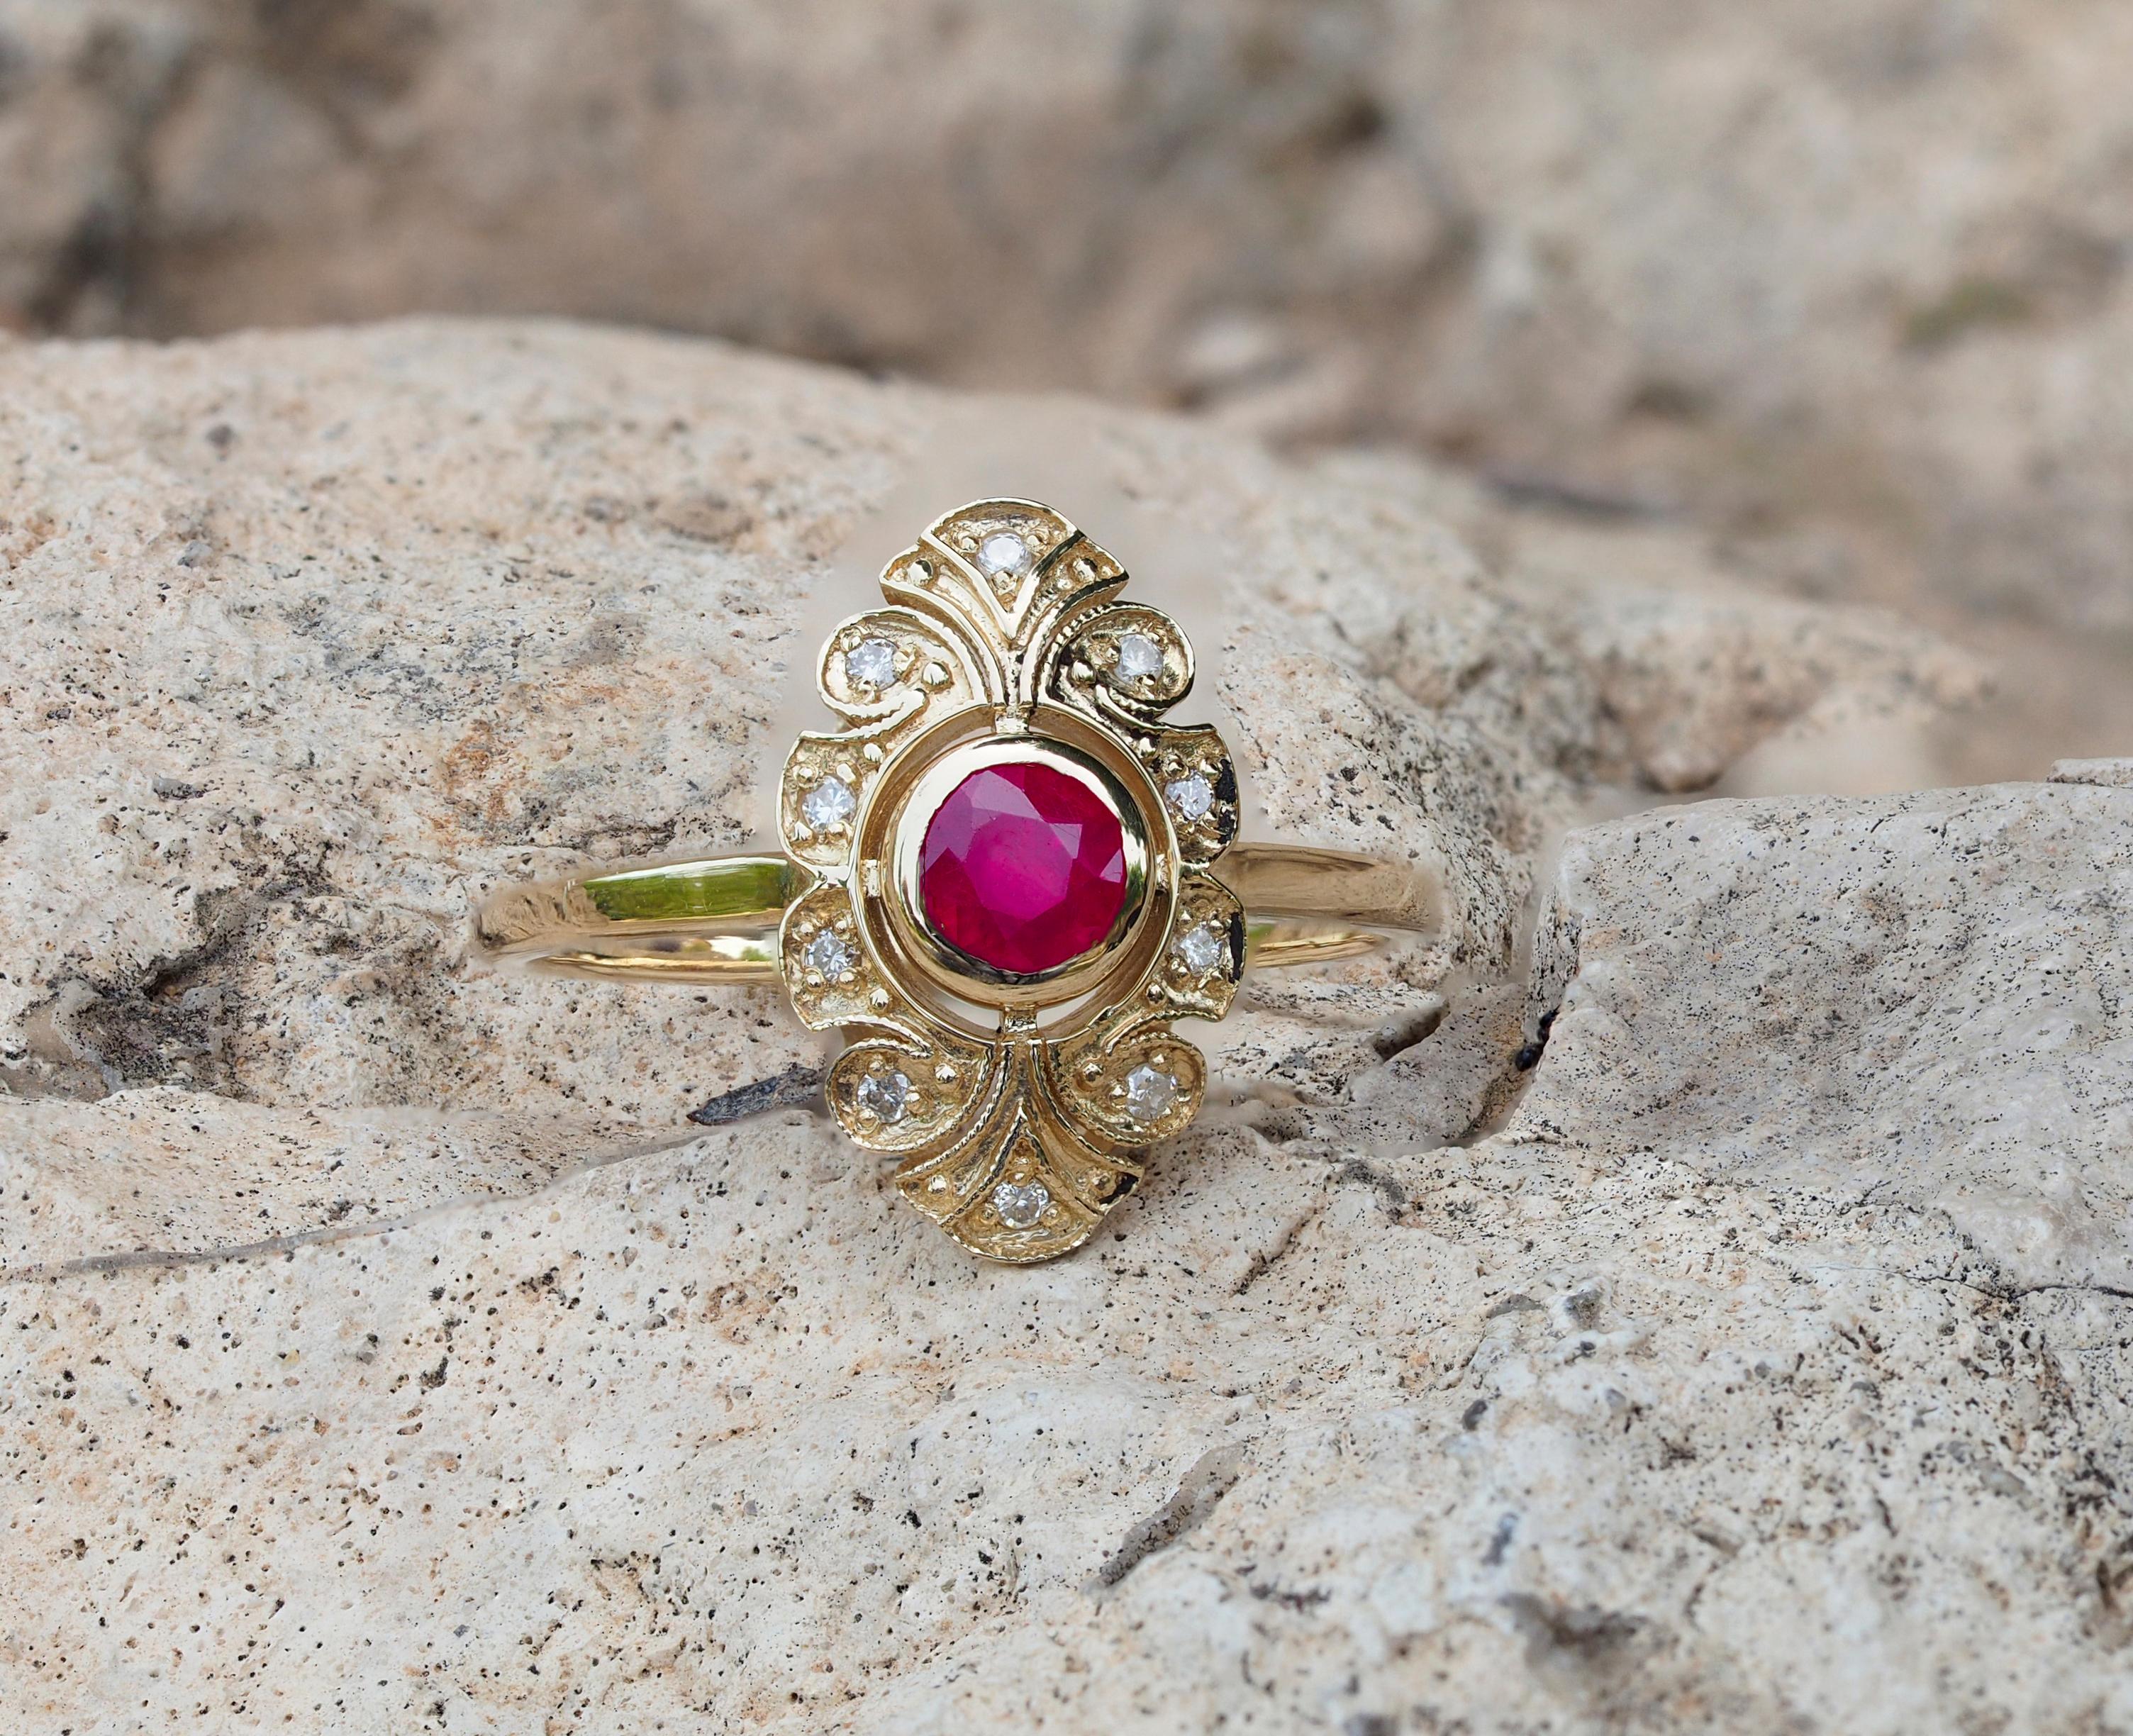 For Sale:  14 karat Gold Ring with Ruby and Diamonds, Vintage Inspired Ring.  2